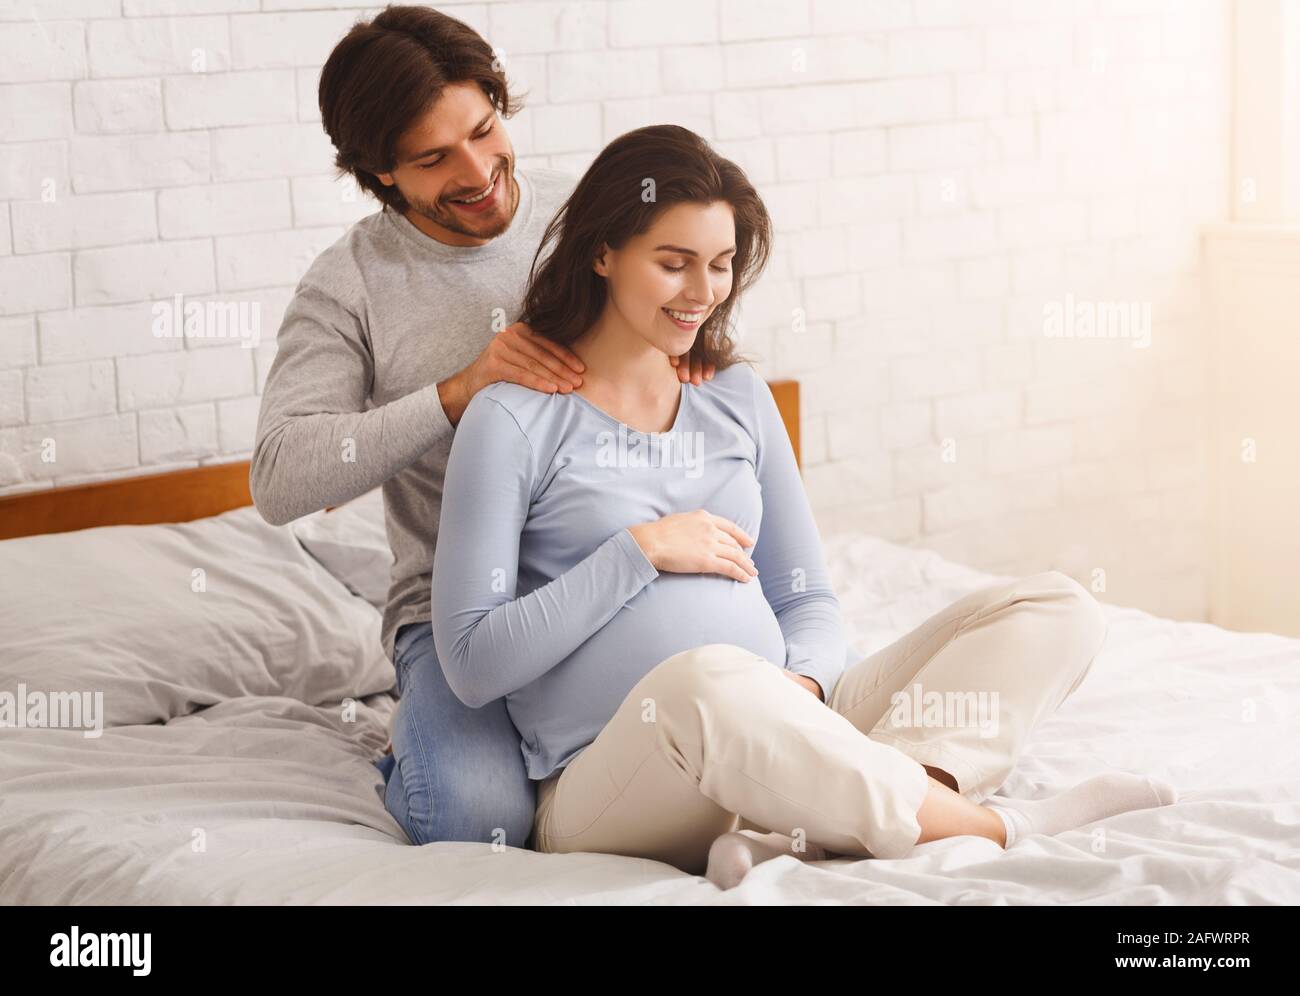 Loving husband making back massage to his happy pregnant wife Stock Photo